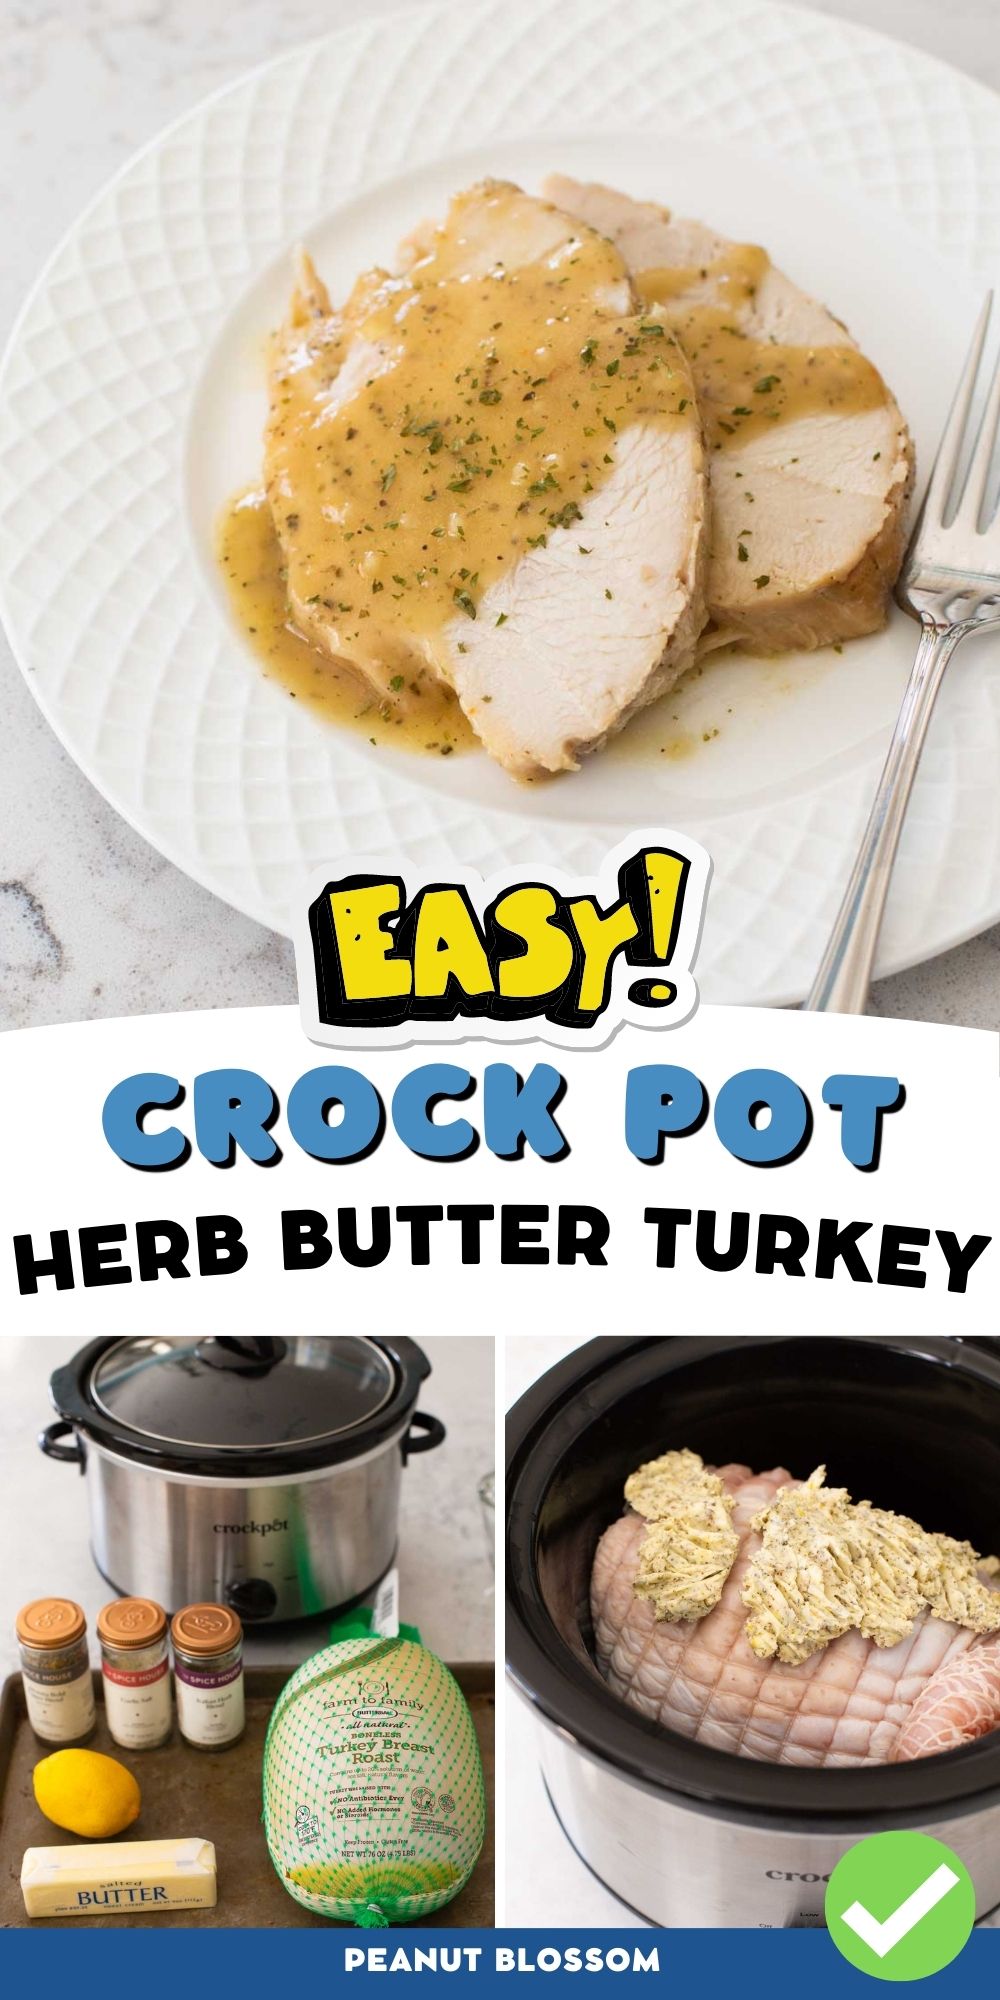 The sliced turkey with gravy on a plate, the crockpot and ingredients below.